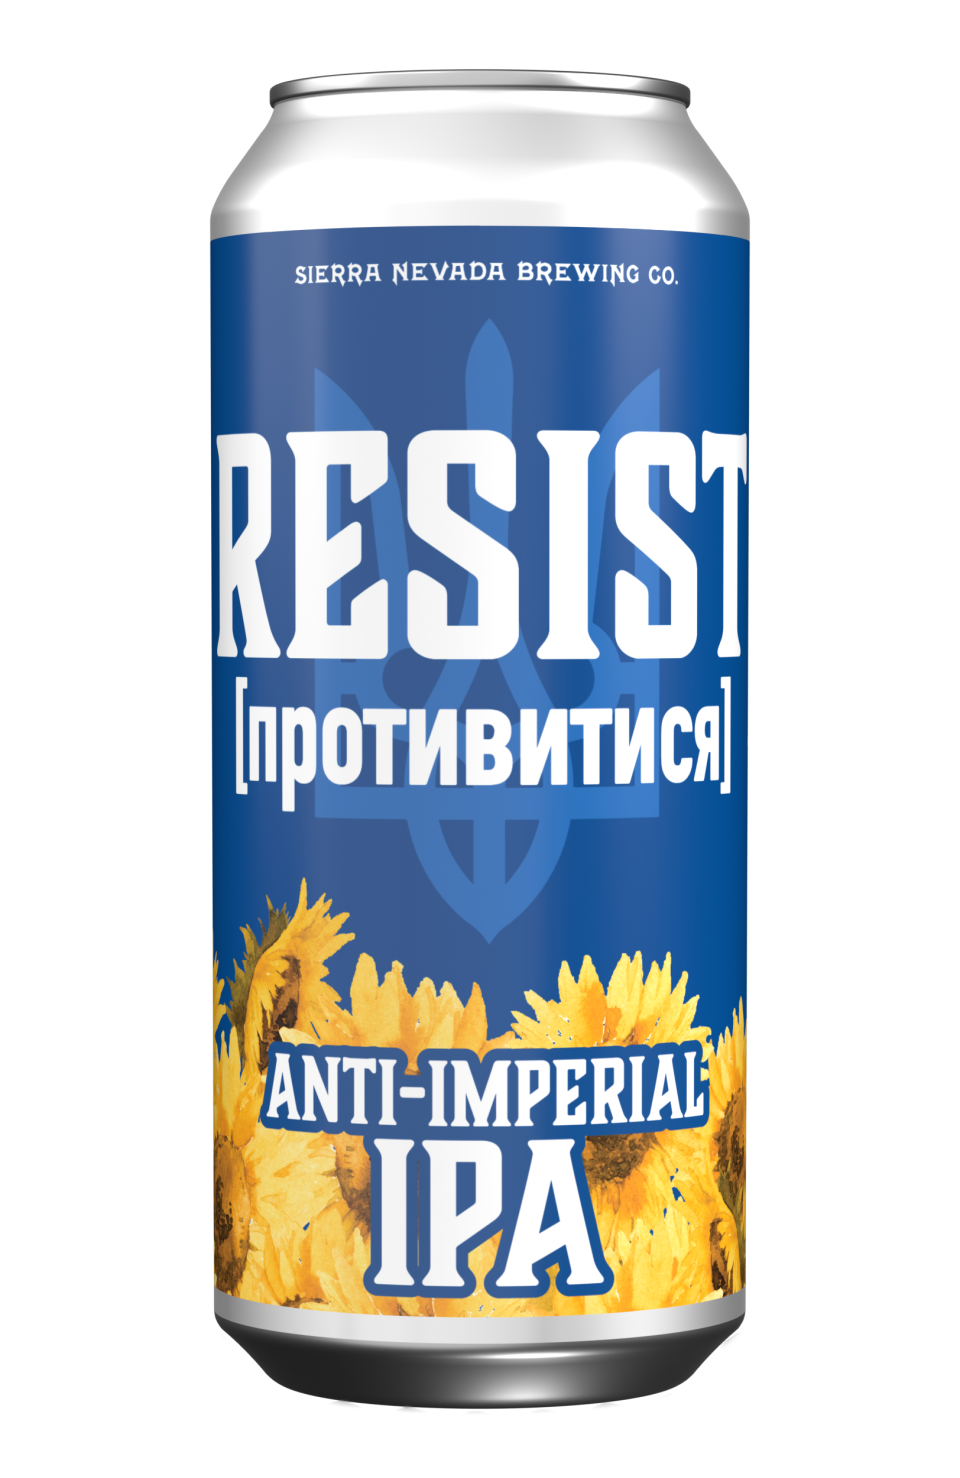 In June, Sierra Nevada Brewing Co. is releasing a new beer in support of the Ukraine relief efforts called the Resist Anti-Imperial IPA.